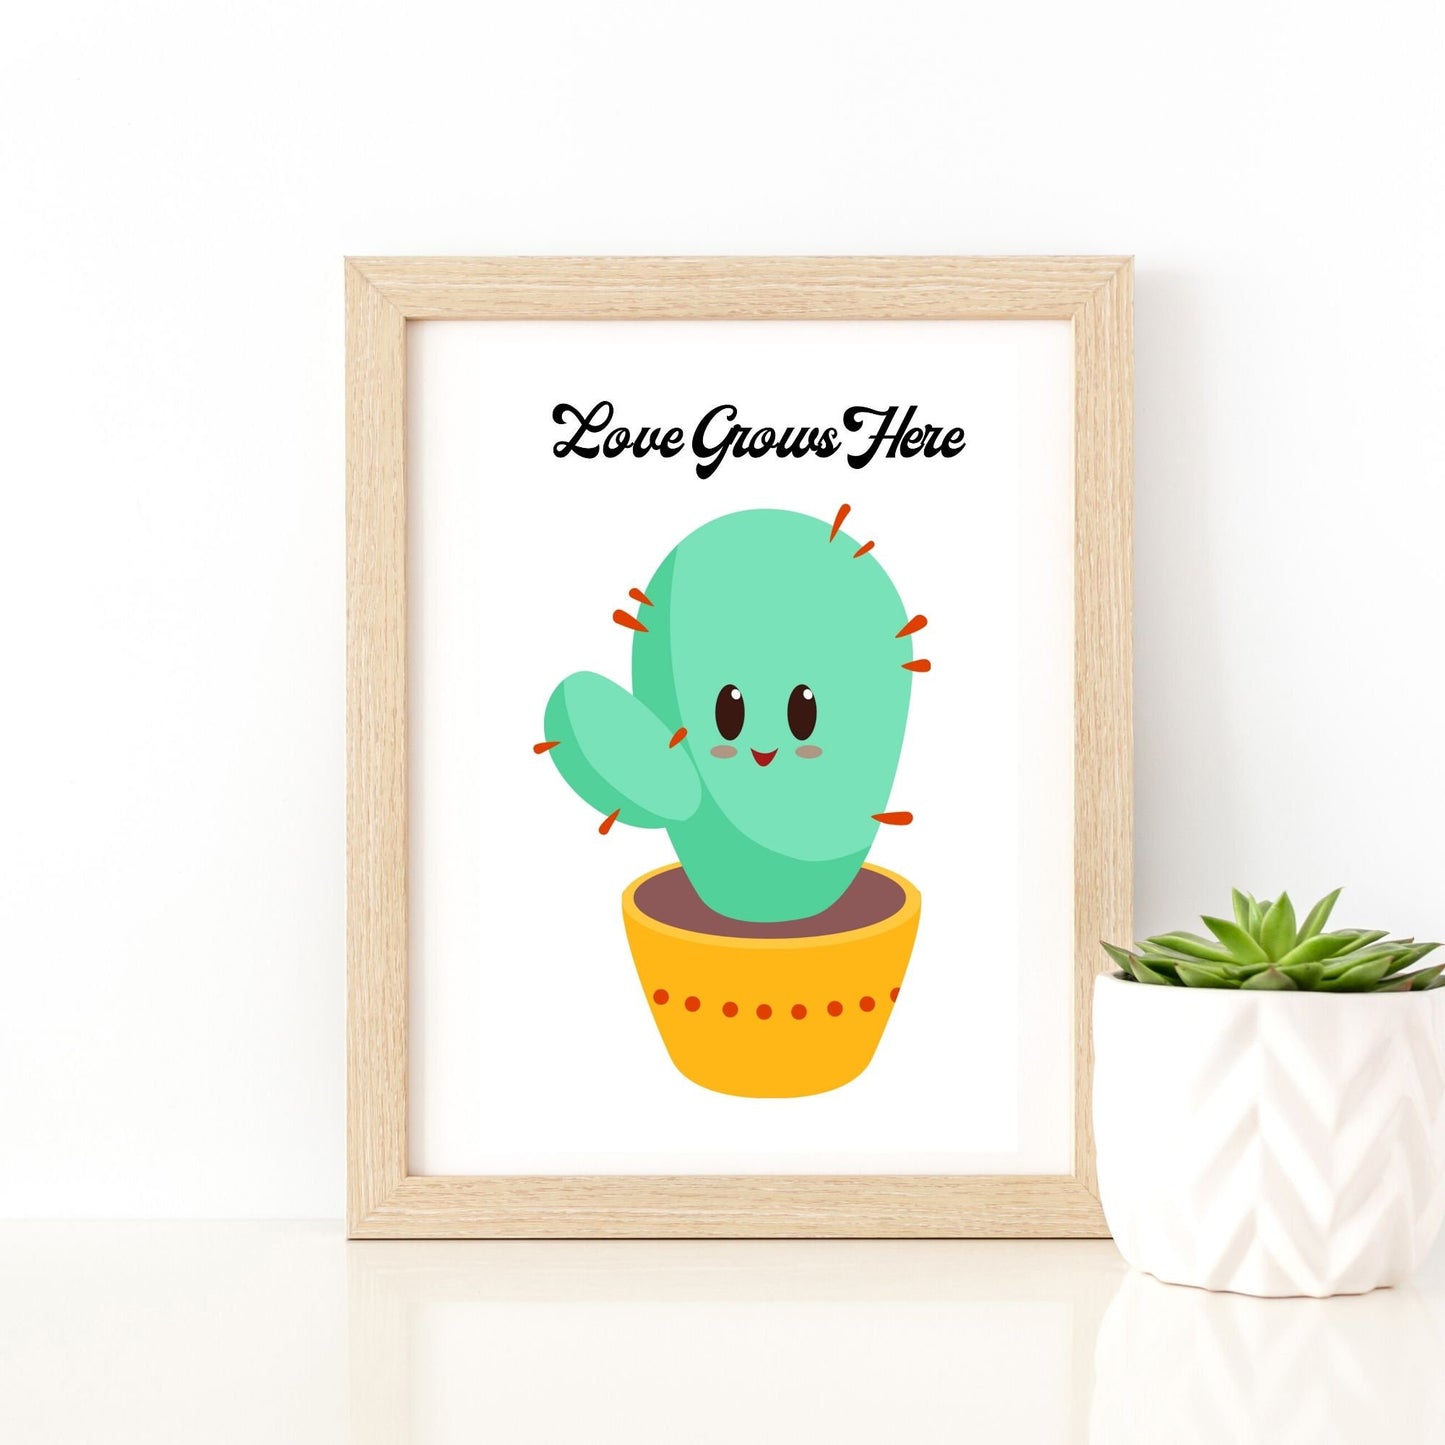 Love Grows Here-Simple Succulent Wall Decoration Digital Download Printable